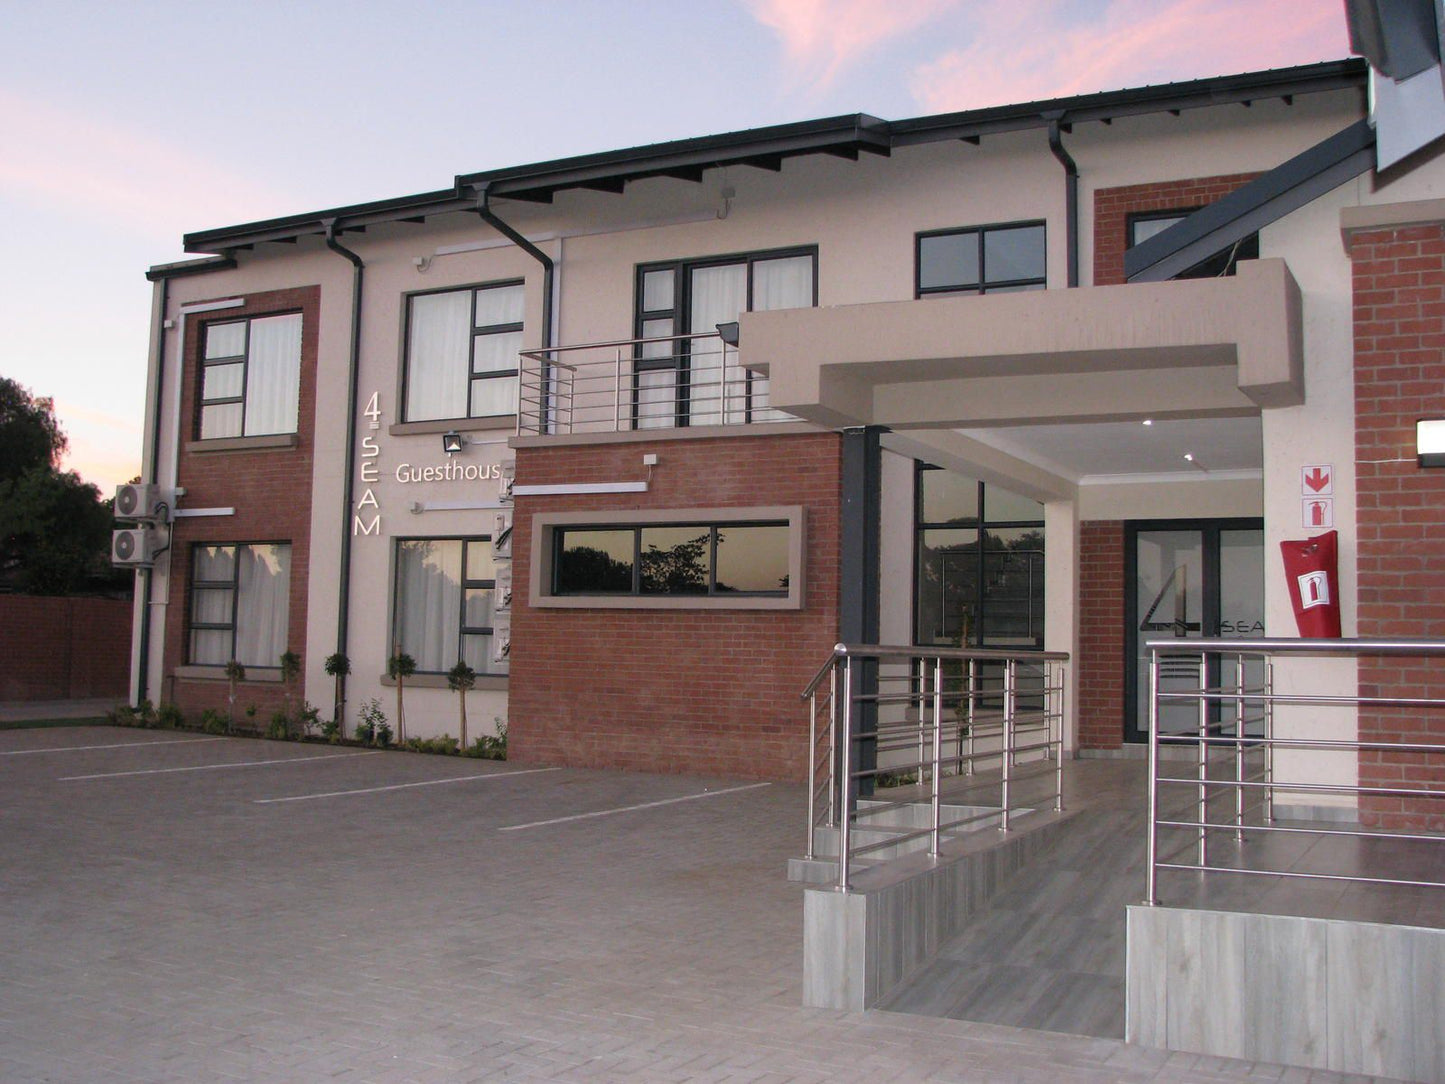 4 Seam Guest House Delmas Mpumalanga South Africa House, Building, Architecture